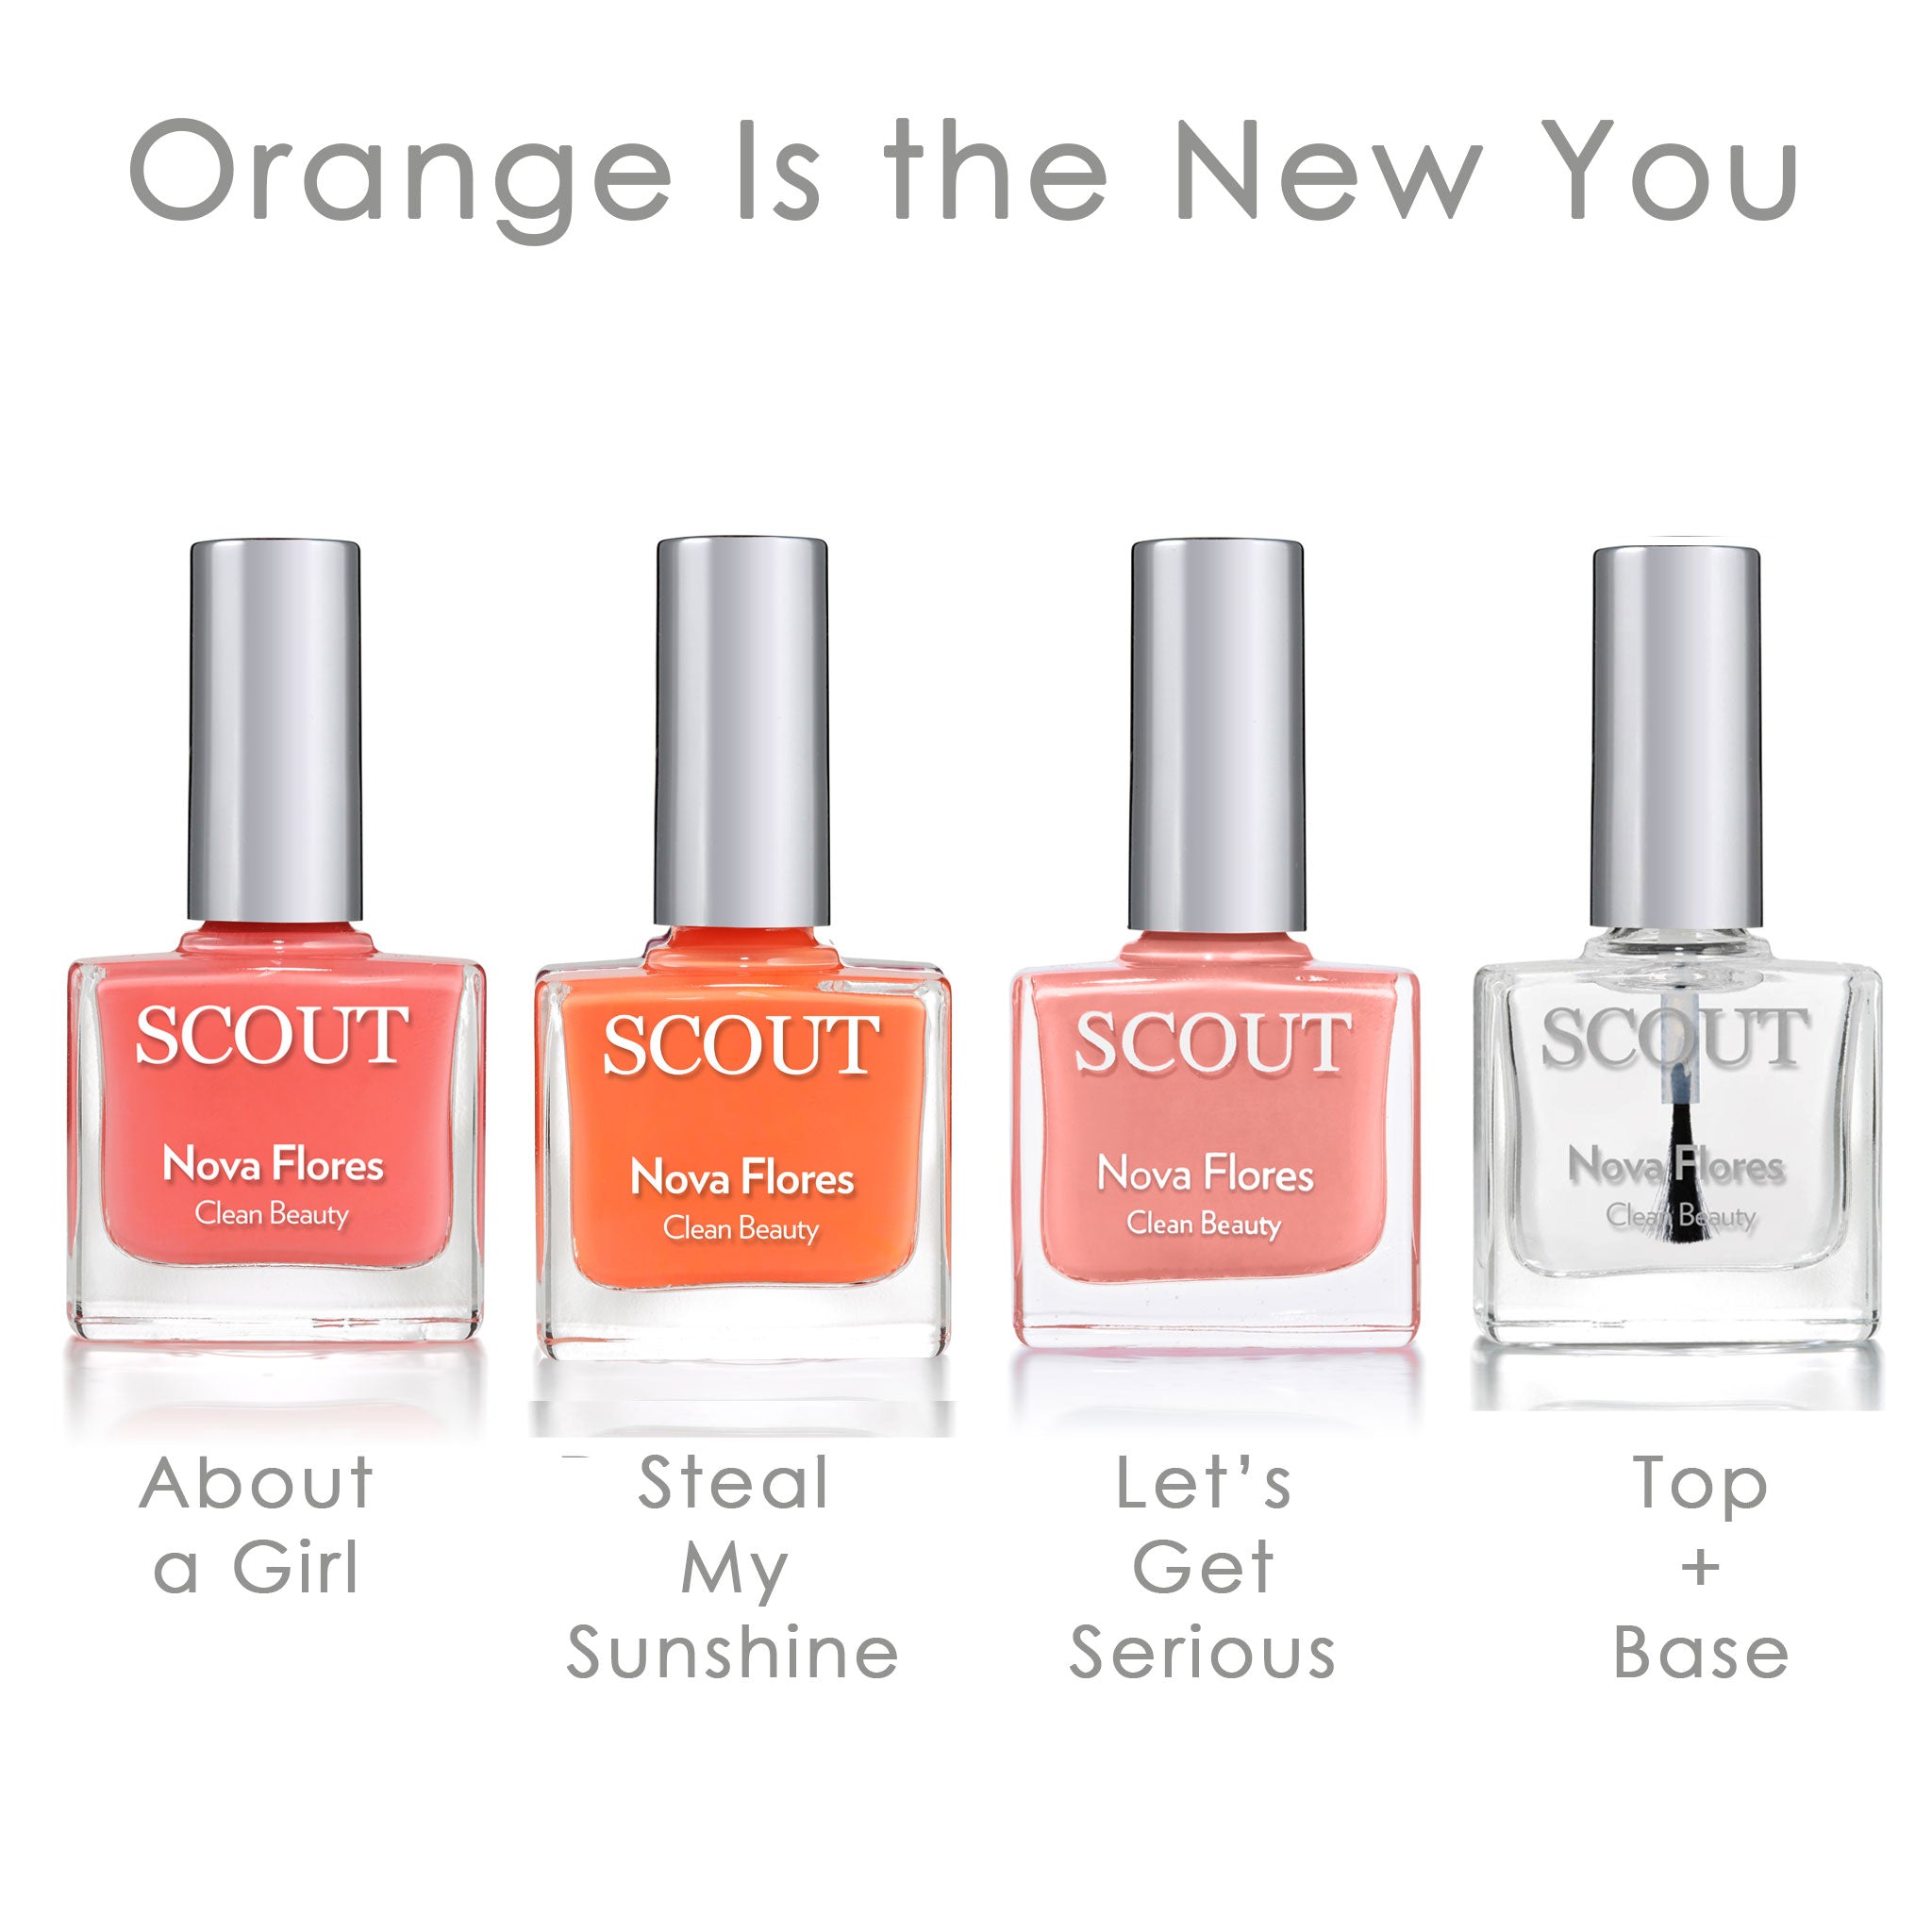 Orange Is the New You